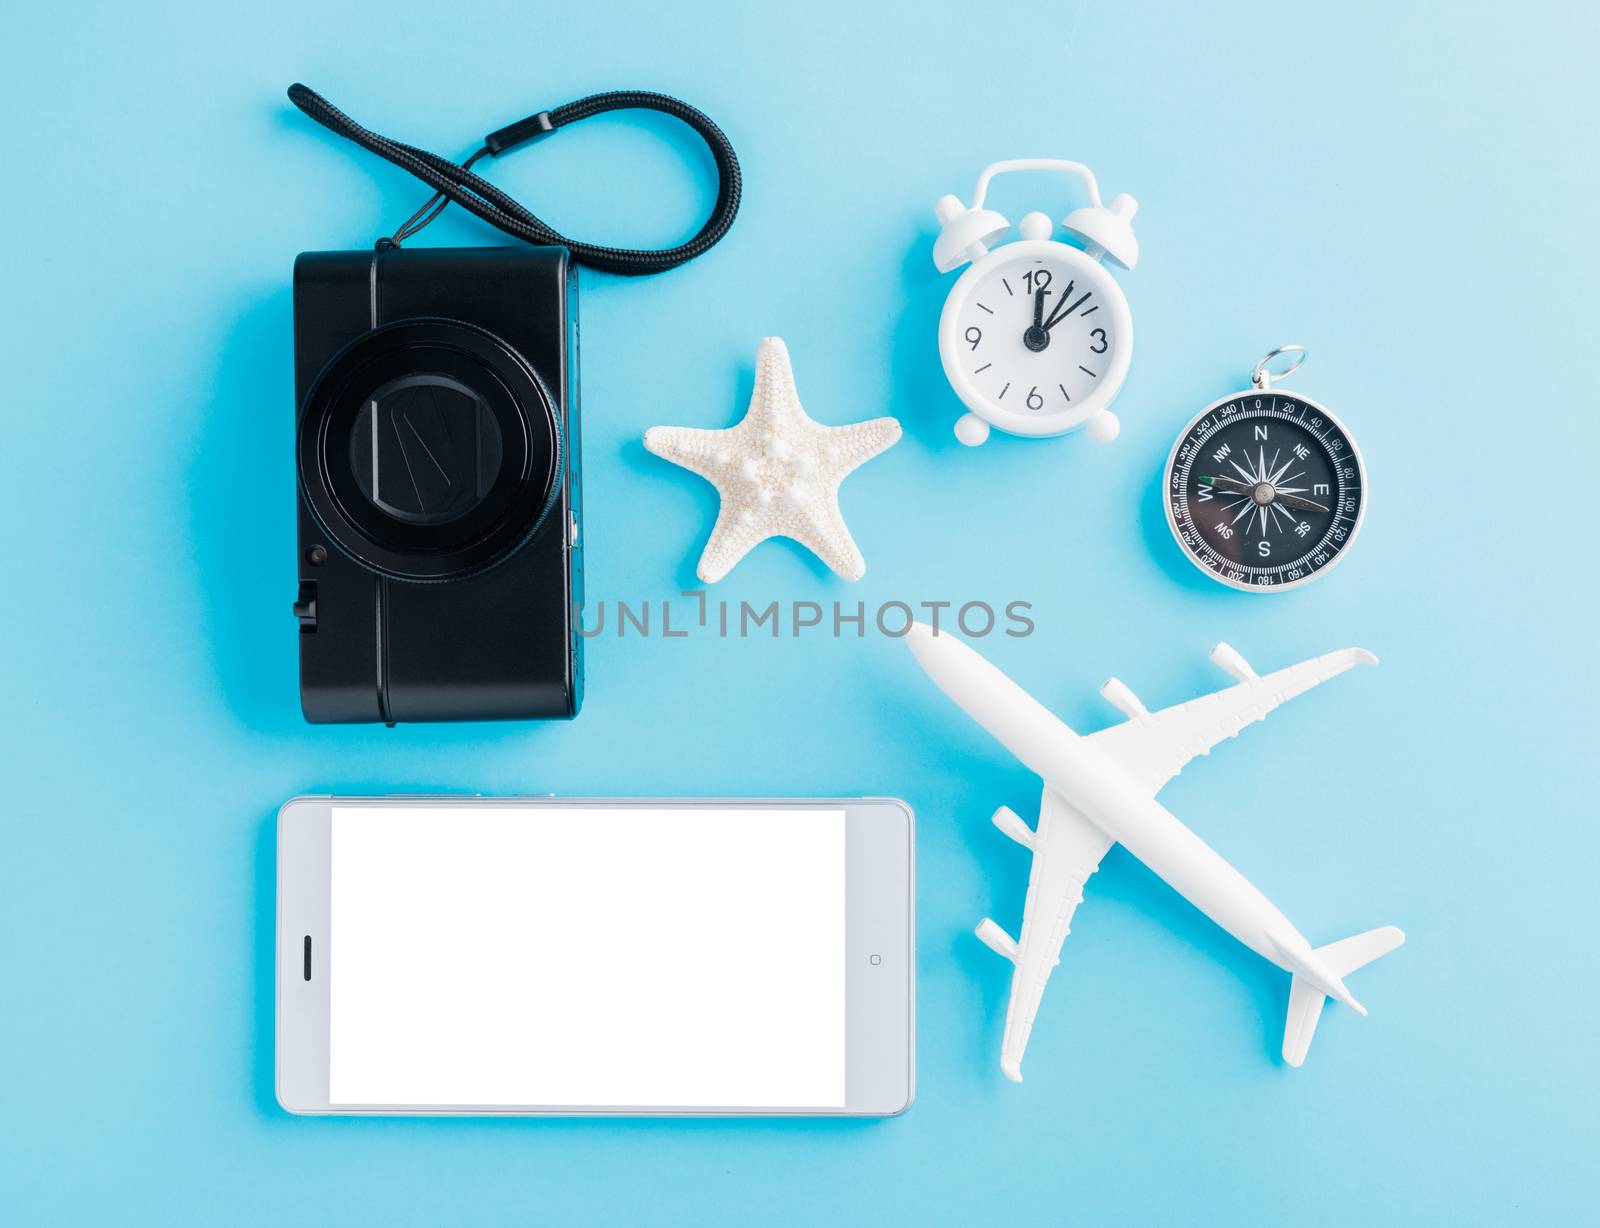 World Tourism Day, Top view of minimal model plane, airplane, starfish, alarm clock, compass and smartphone blank screen, studio shot isolated on a blue background, accessory flight holiday concept